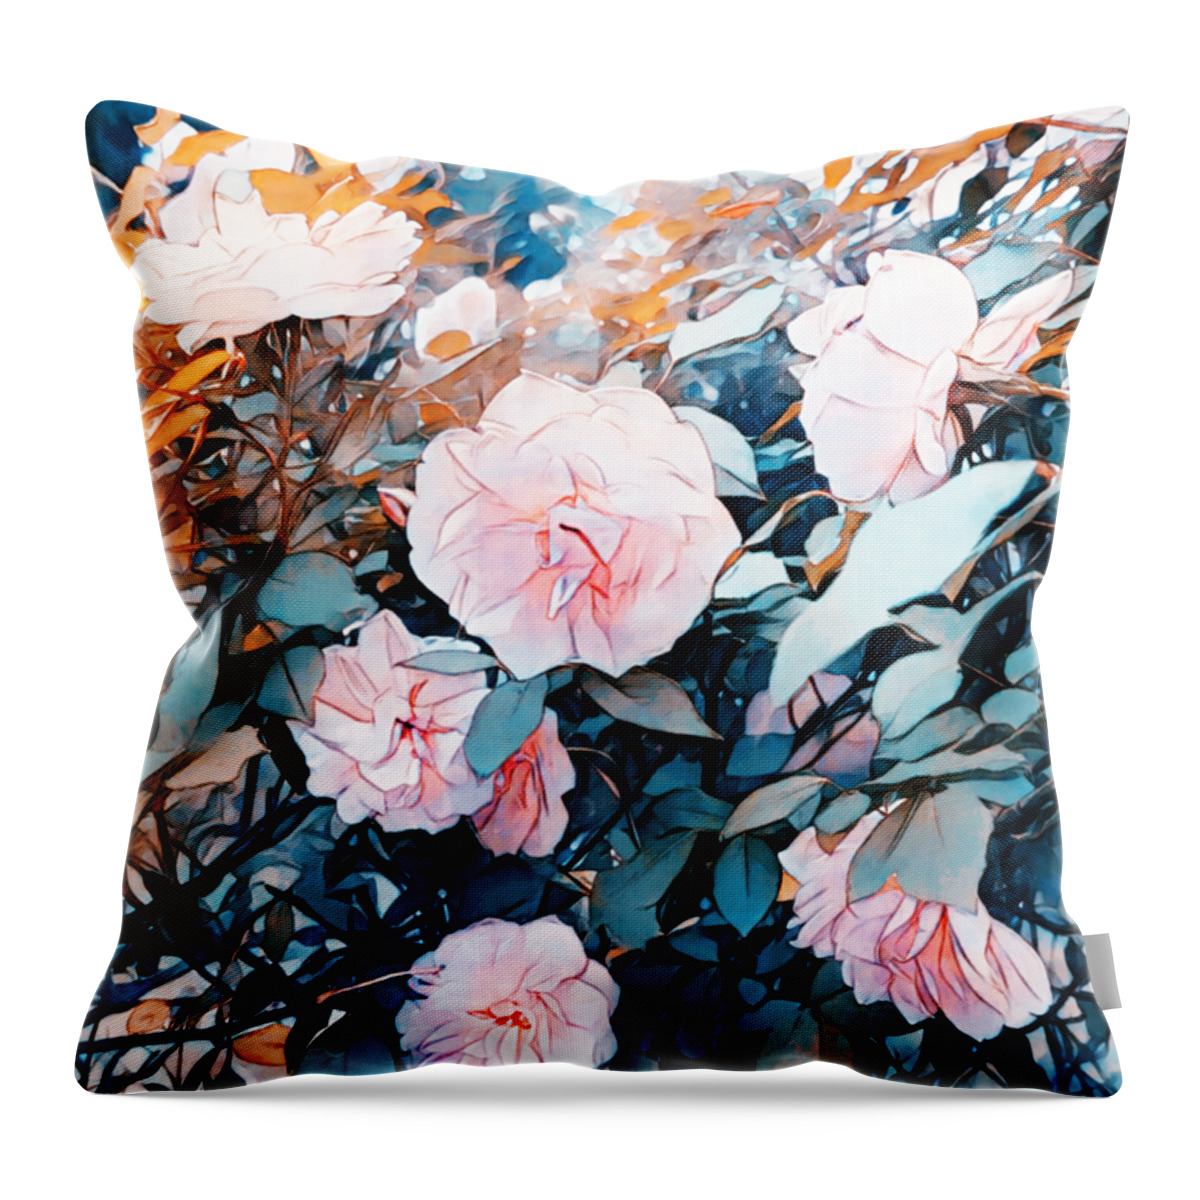 Soft Roses Throw Pillow featuring the digital art Softly Speaks These Roses by Pamela Smale Williams